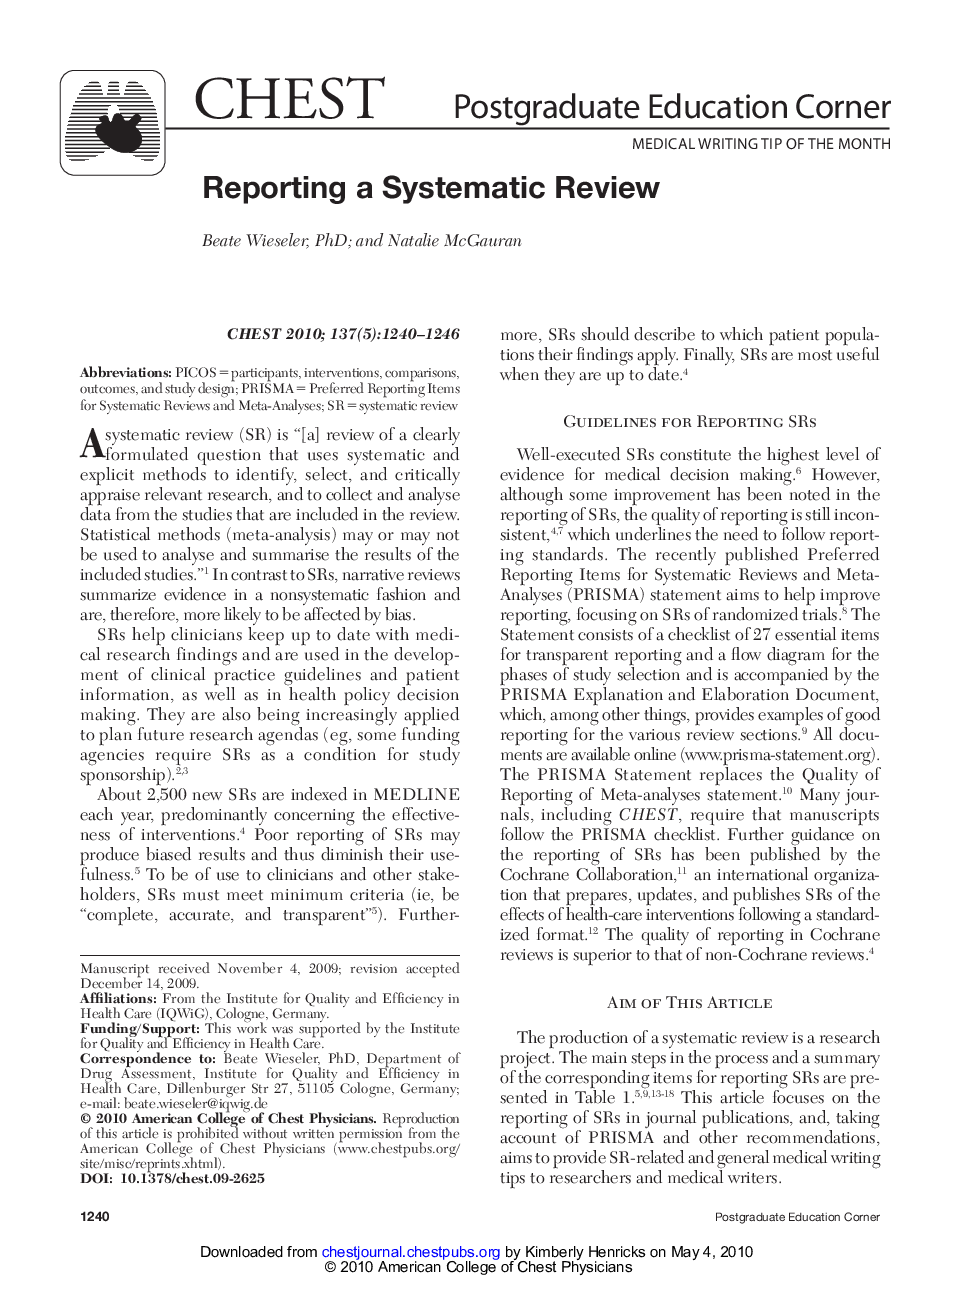 Reporting a Systematic Review